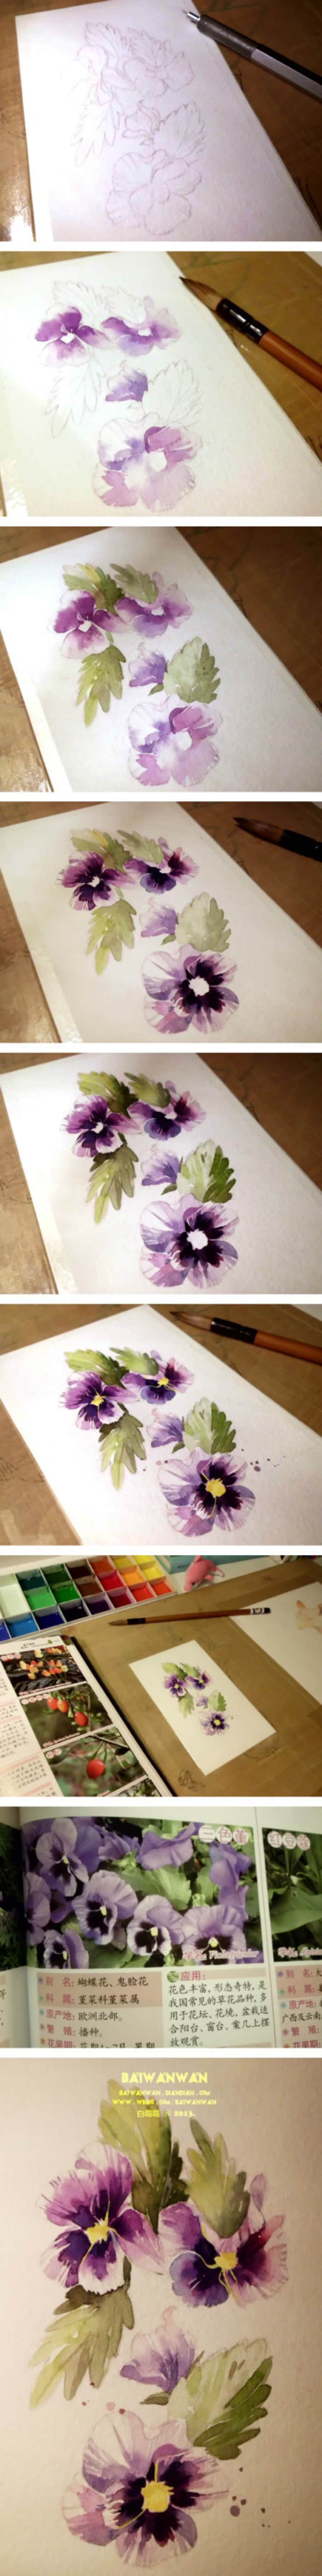 5. WATER-COLORING IS ALL ABOUT LAYERING TONES AND PLAYING WITH WATER